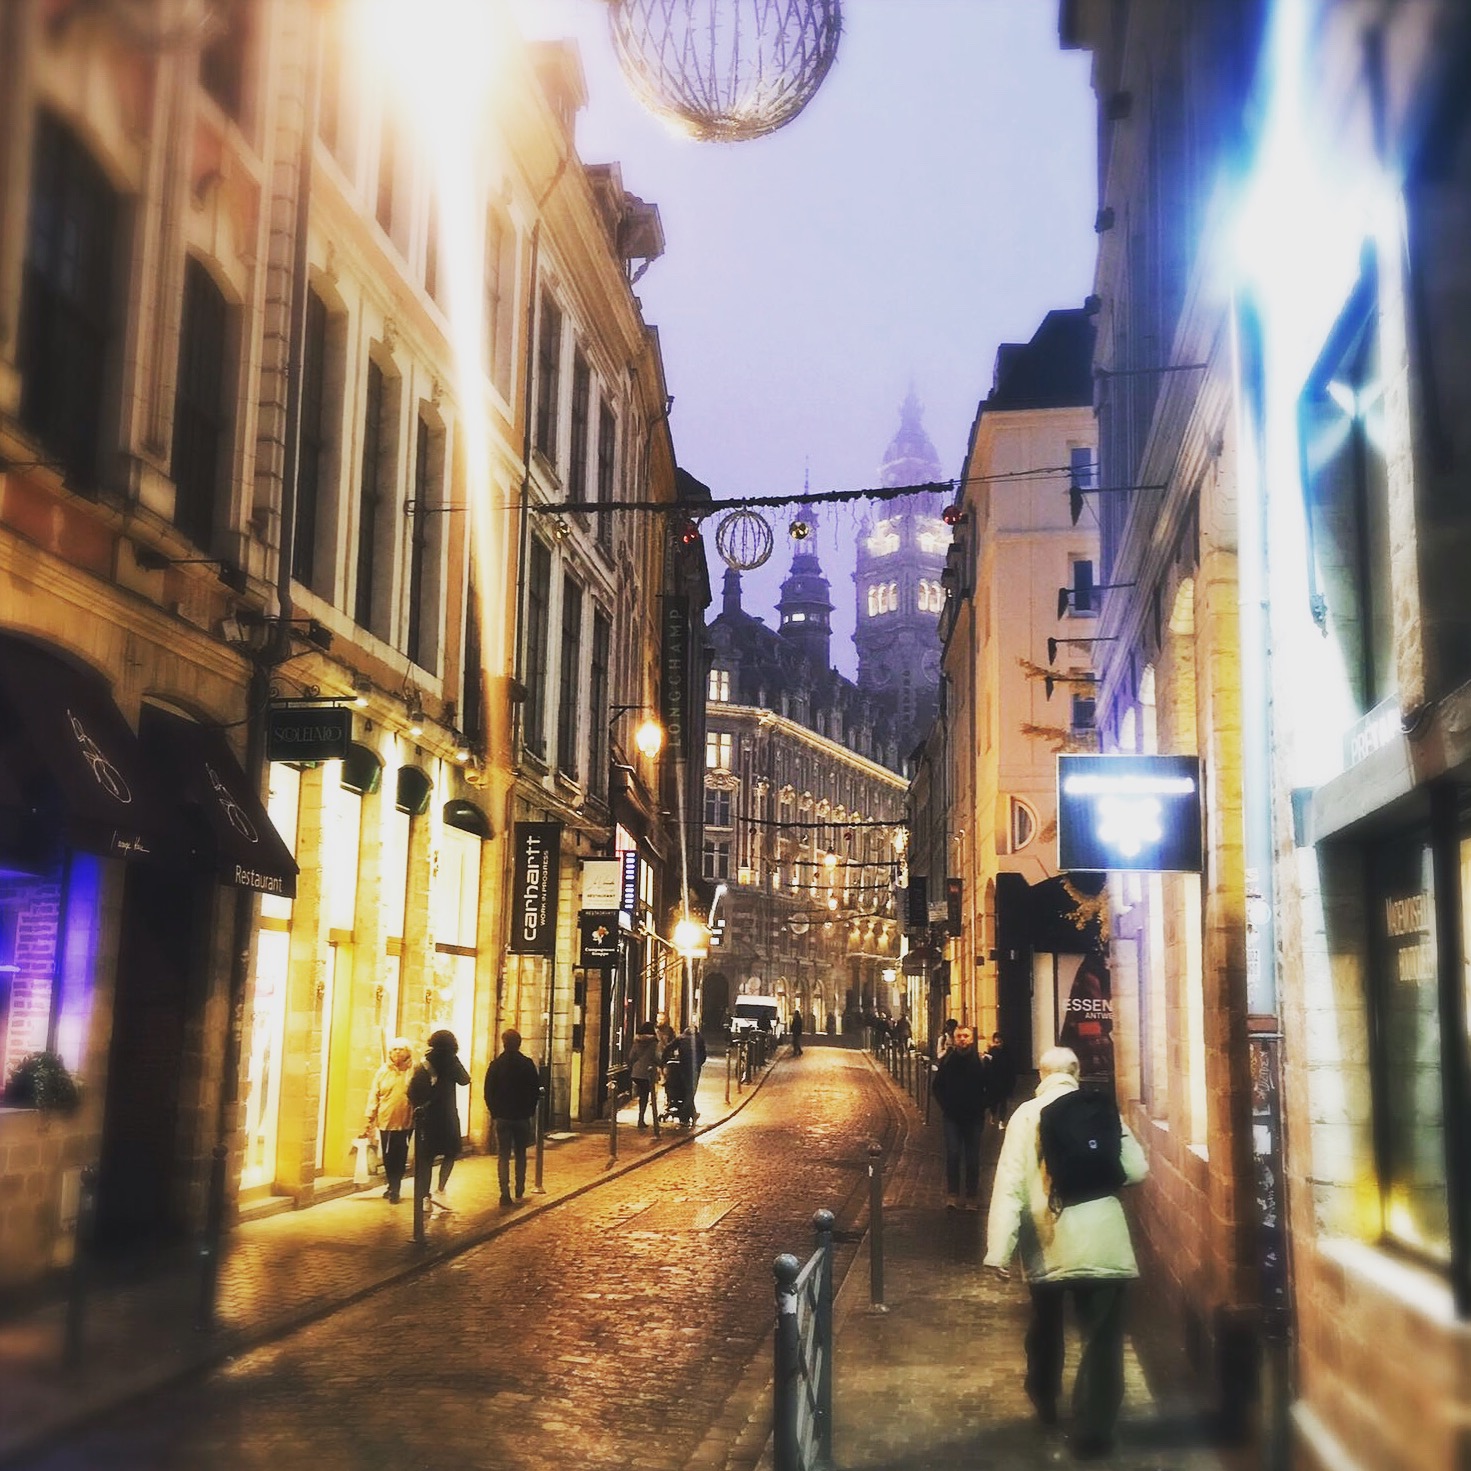 Lille by night